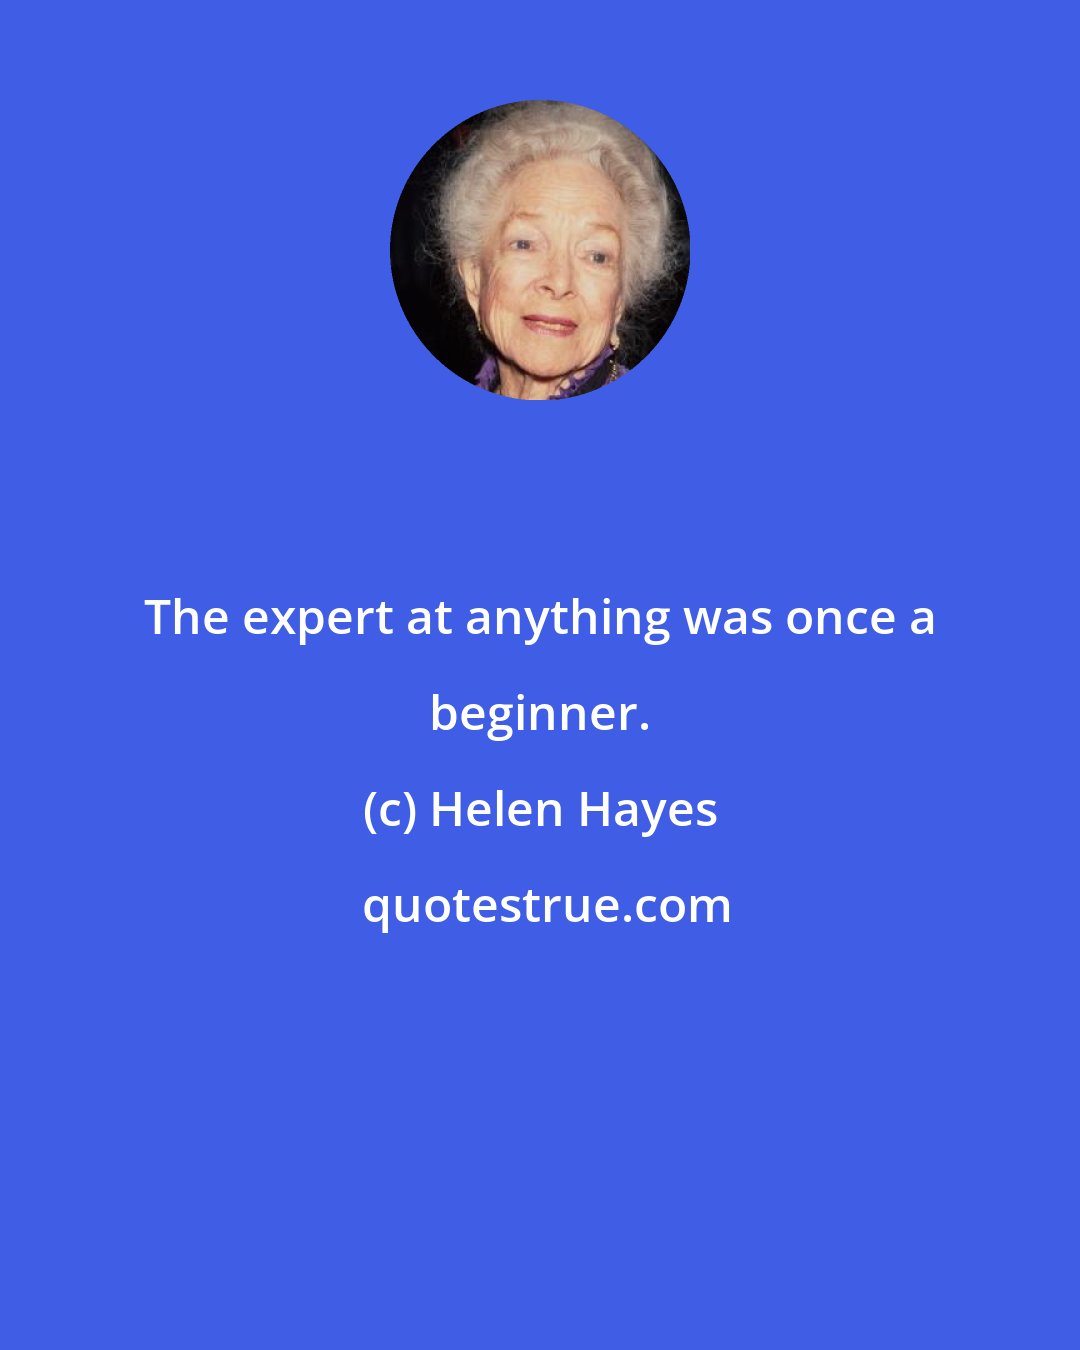 Helen Hayes: The expert at anything was once a beginner.